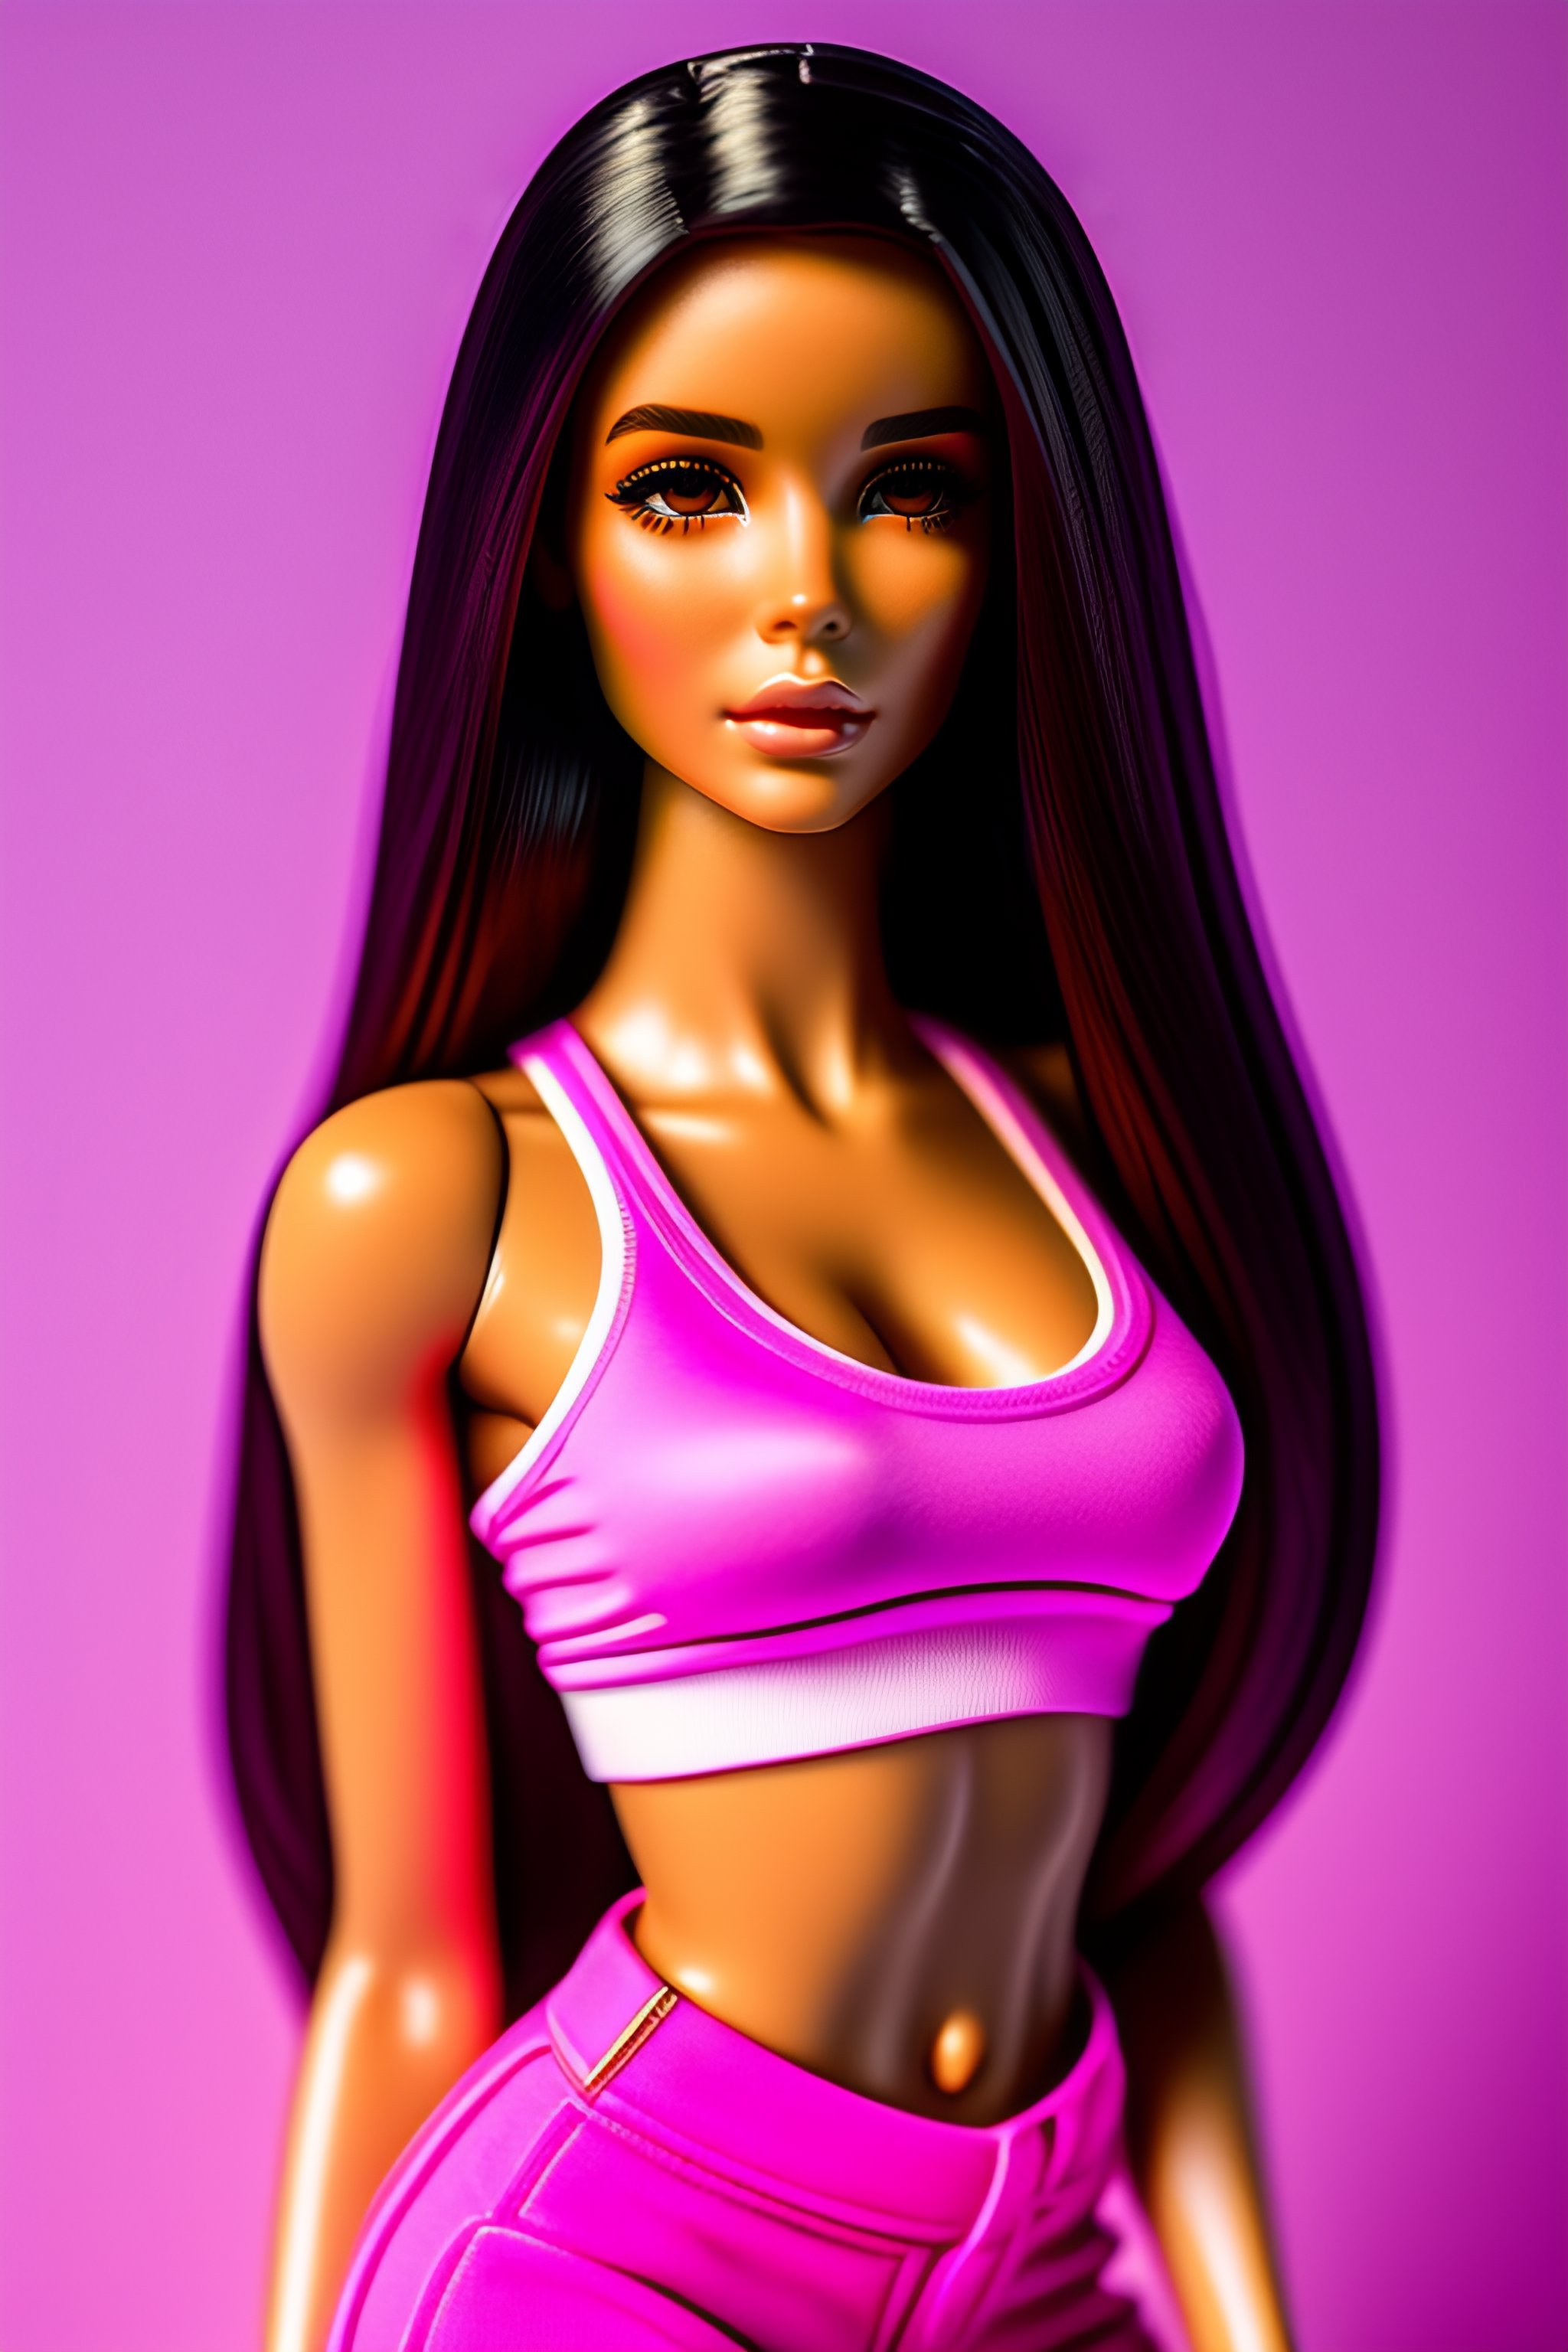 Lexica - Madison beer plastic tight barbie doll body, pretty